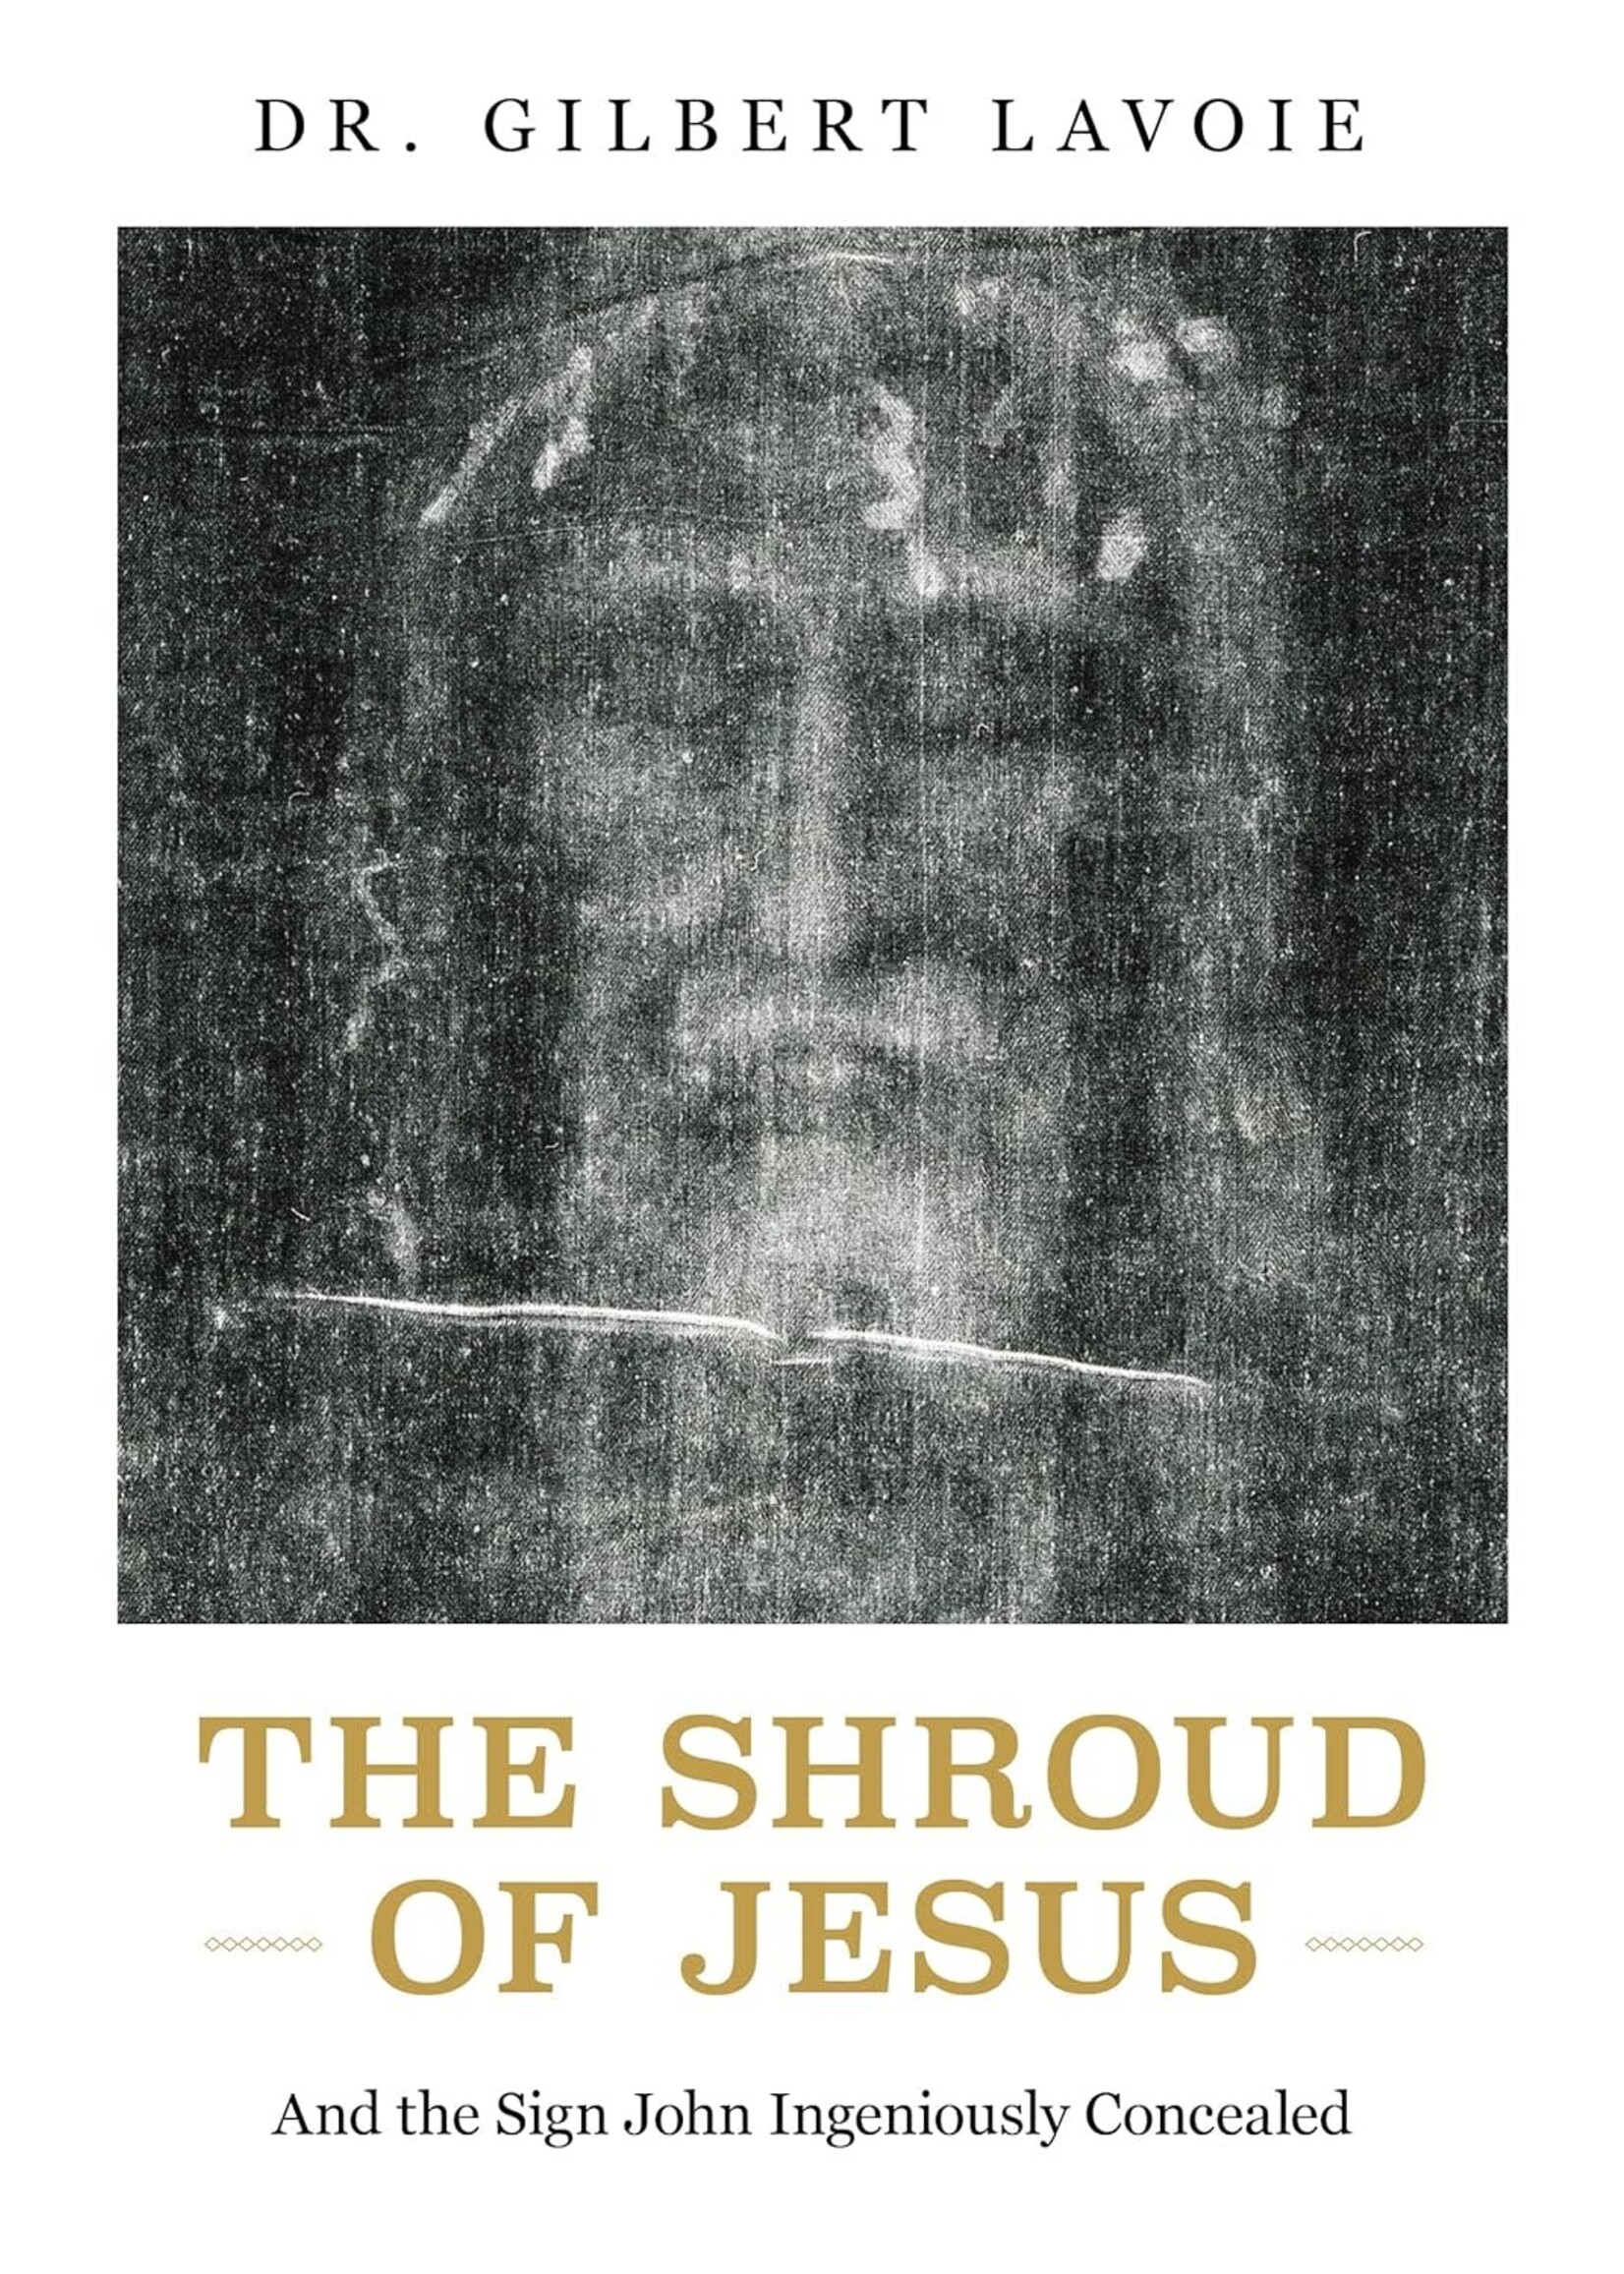 The Shroud of Jesus: And the Sign John Ingeniously Concealed